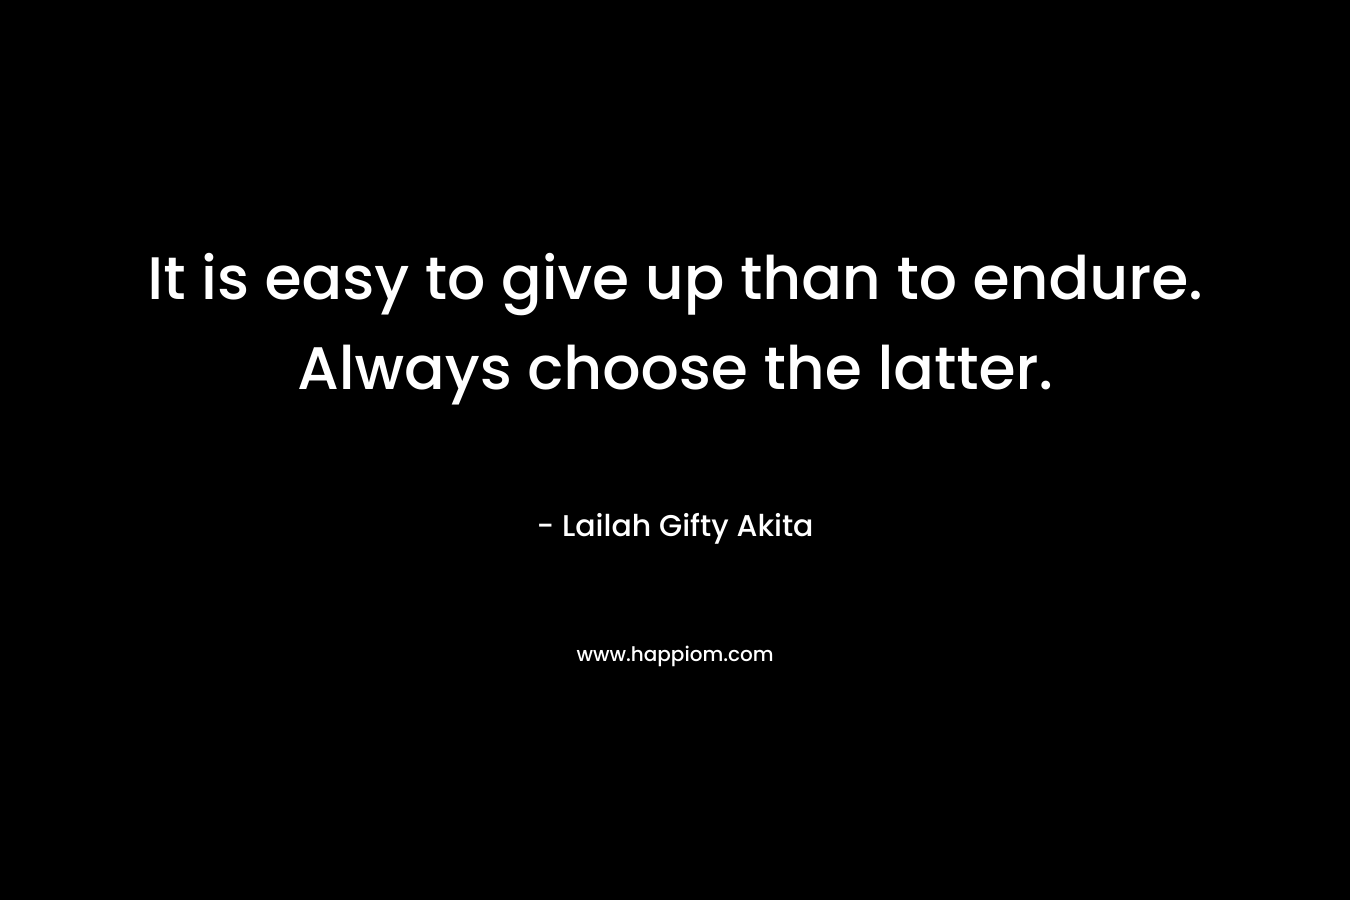 It is easy to give up than to endure. Always choose the latter.